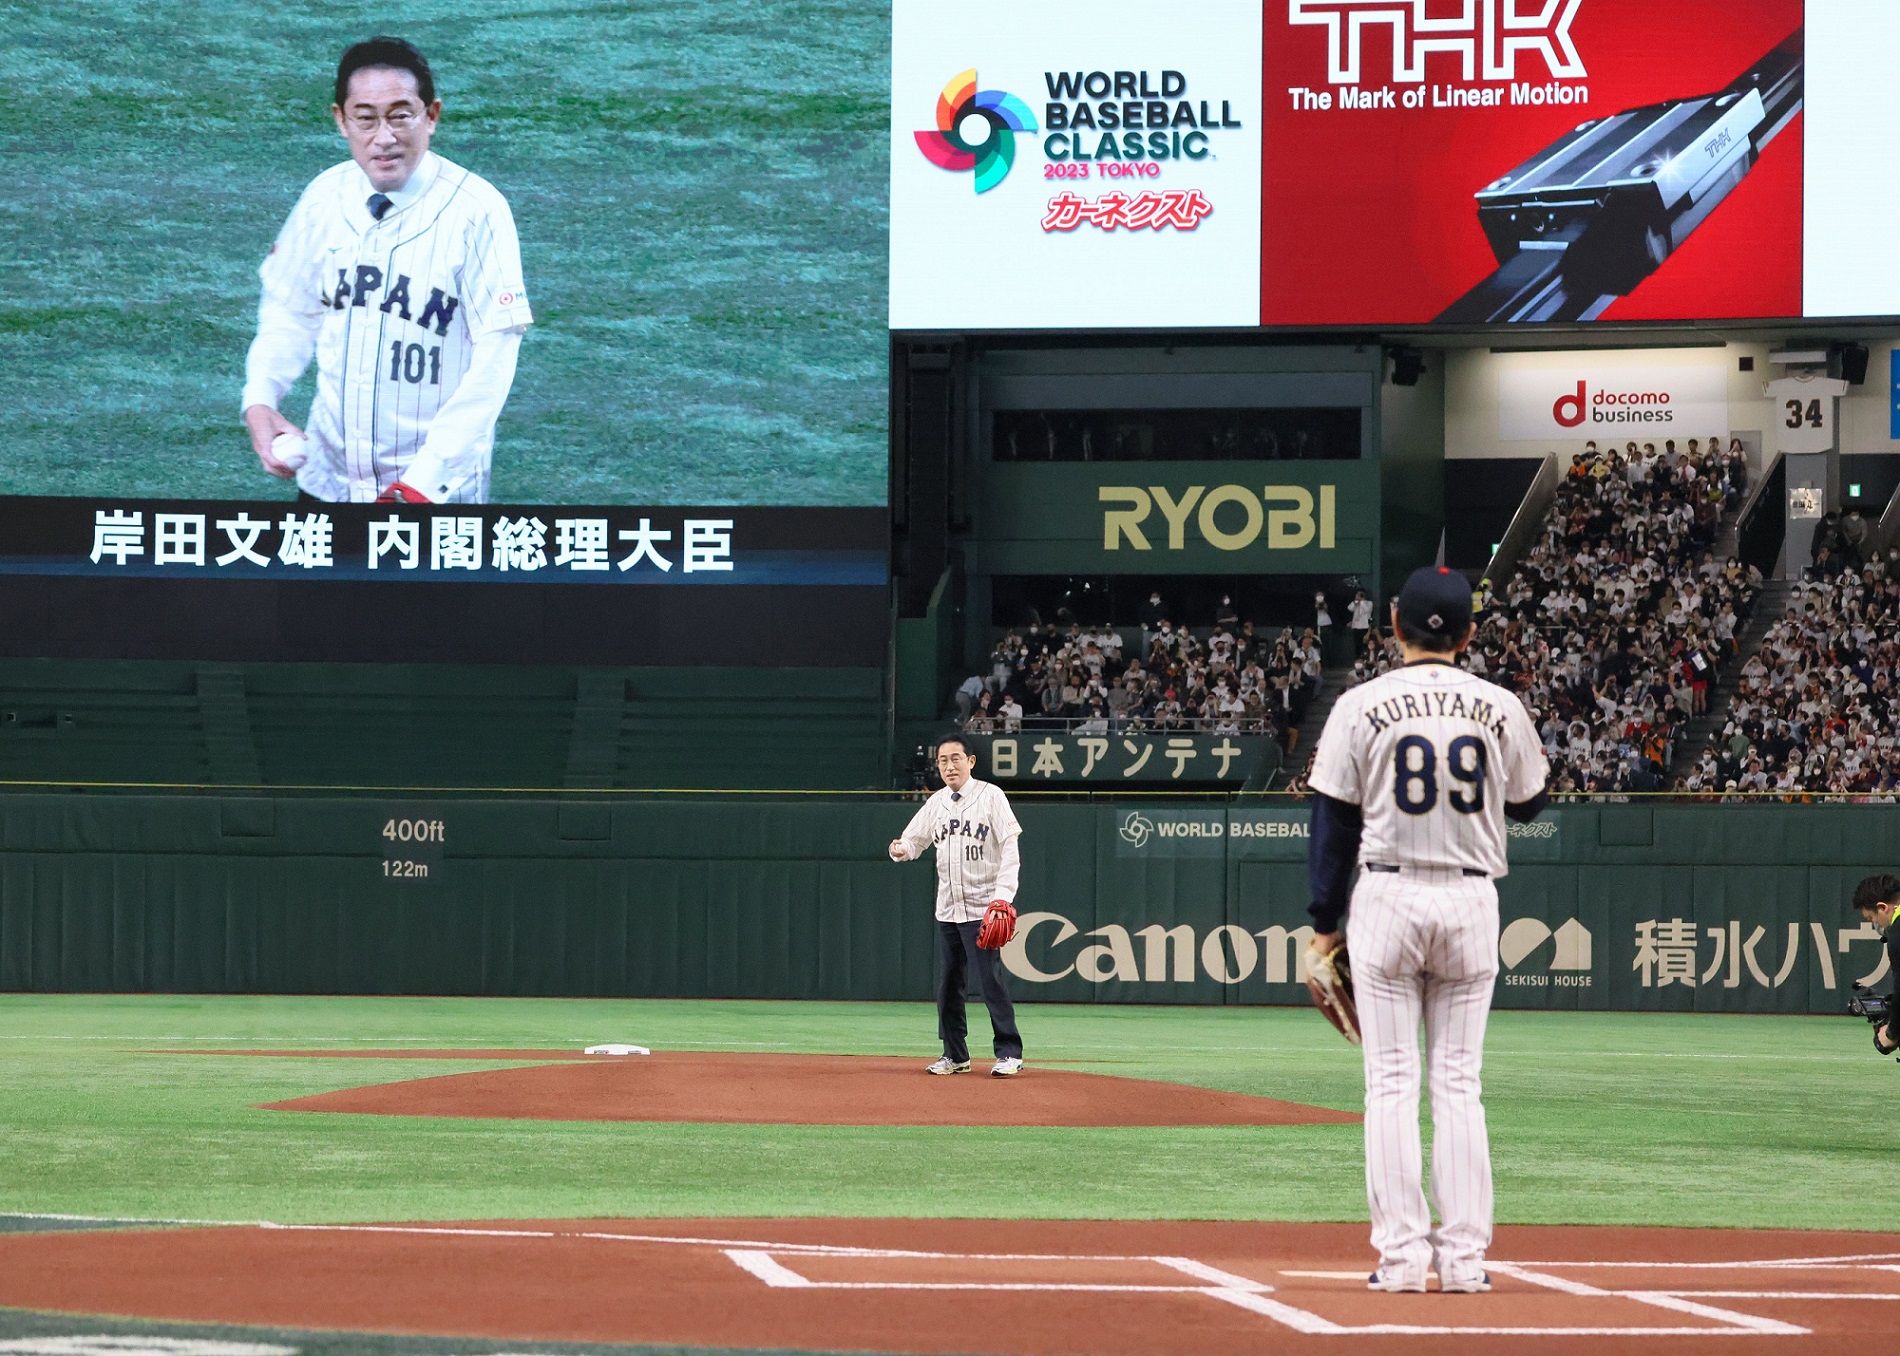 Prime Minister Kishida throwing out the ceremonial first pitch (2)